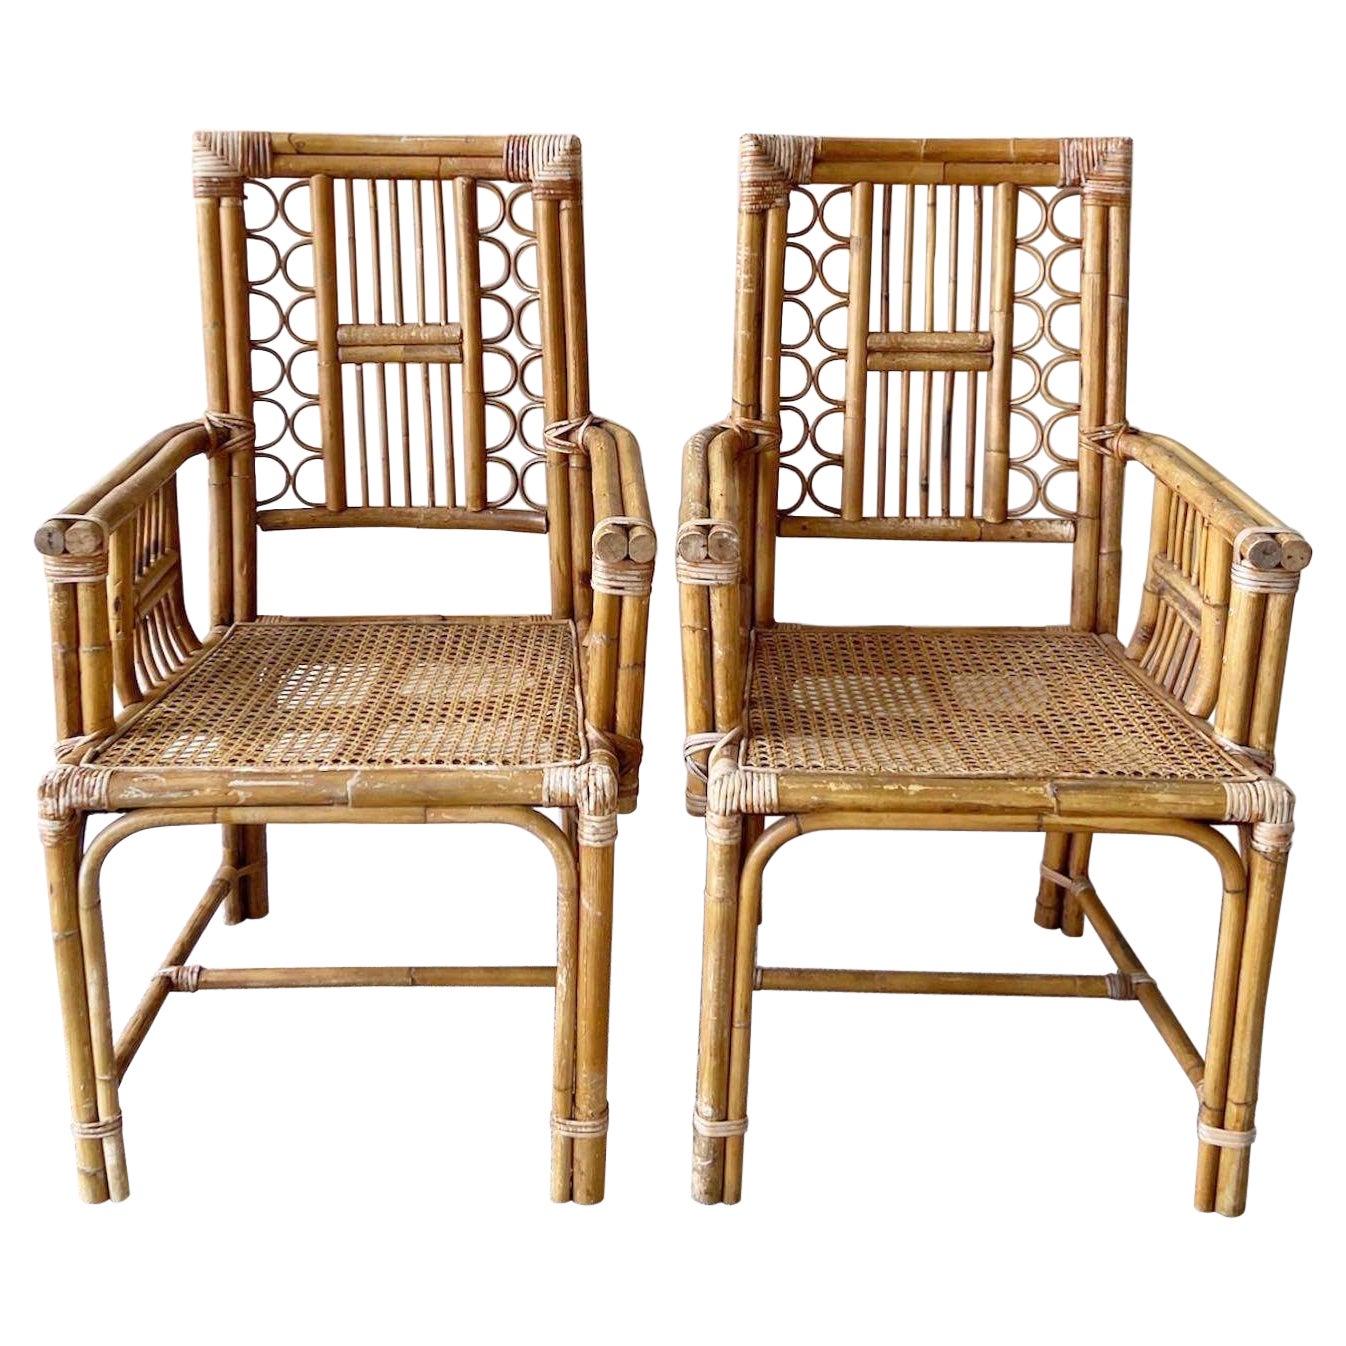 Boho Chic Bamboo Rattan and Cane Dining Chairs Attributed to Brighton - a Pair For Sale